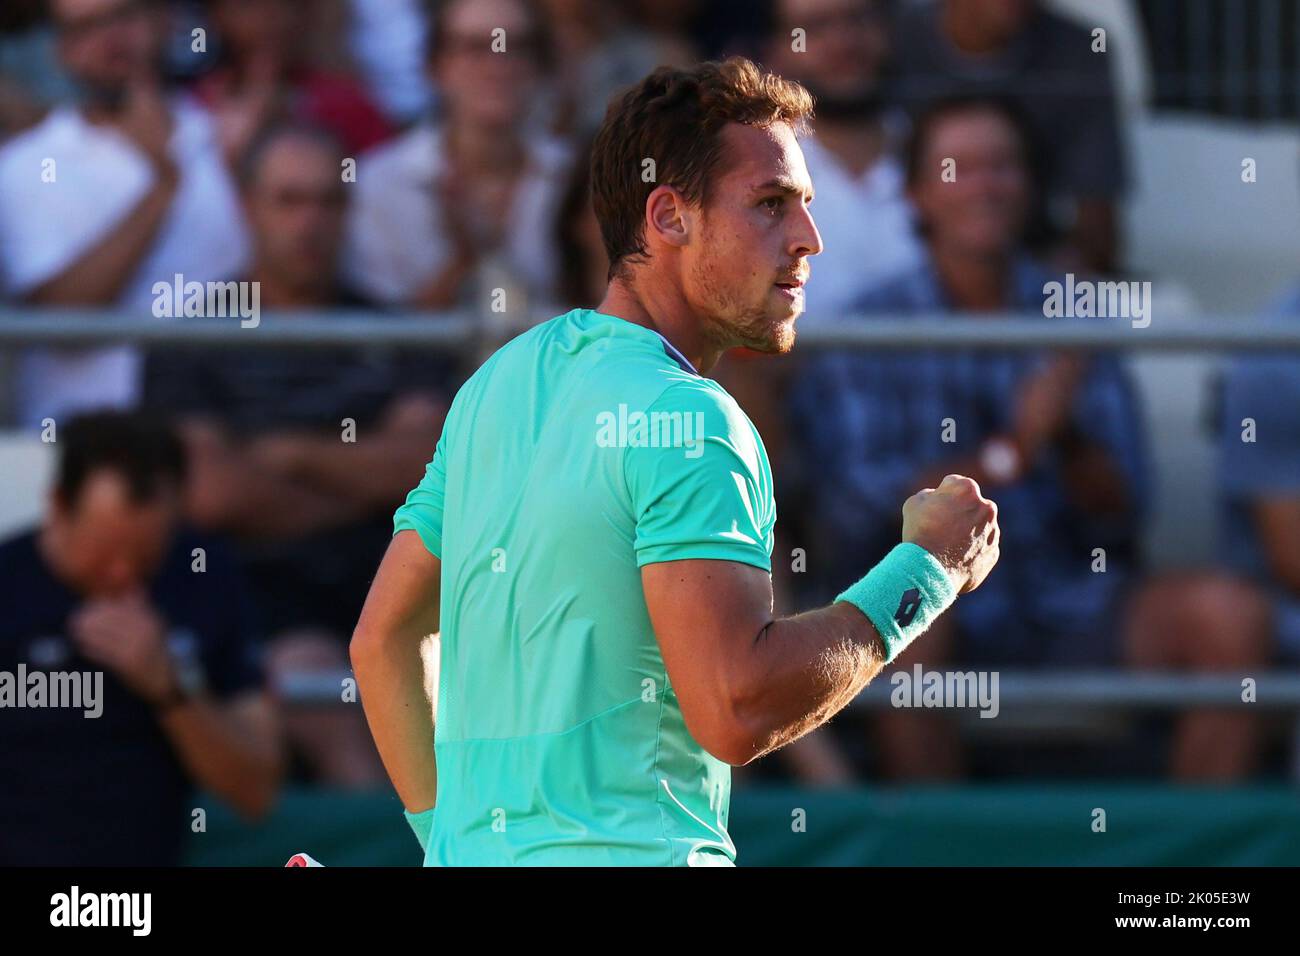 Seville, Spain. 9th Sep, 2022. SEVILLA, SPAIN - SEPTEMBER 09: Roberto Carballes  Baena of Spain celebrate a point during their quarterfinal match at the ATP  Sevilla Challenger at Real Club Tenis Betis